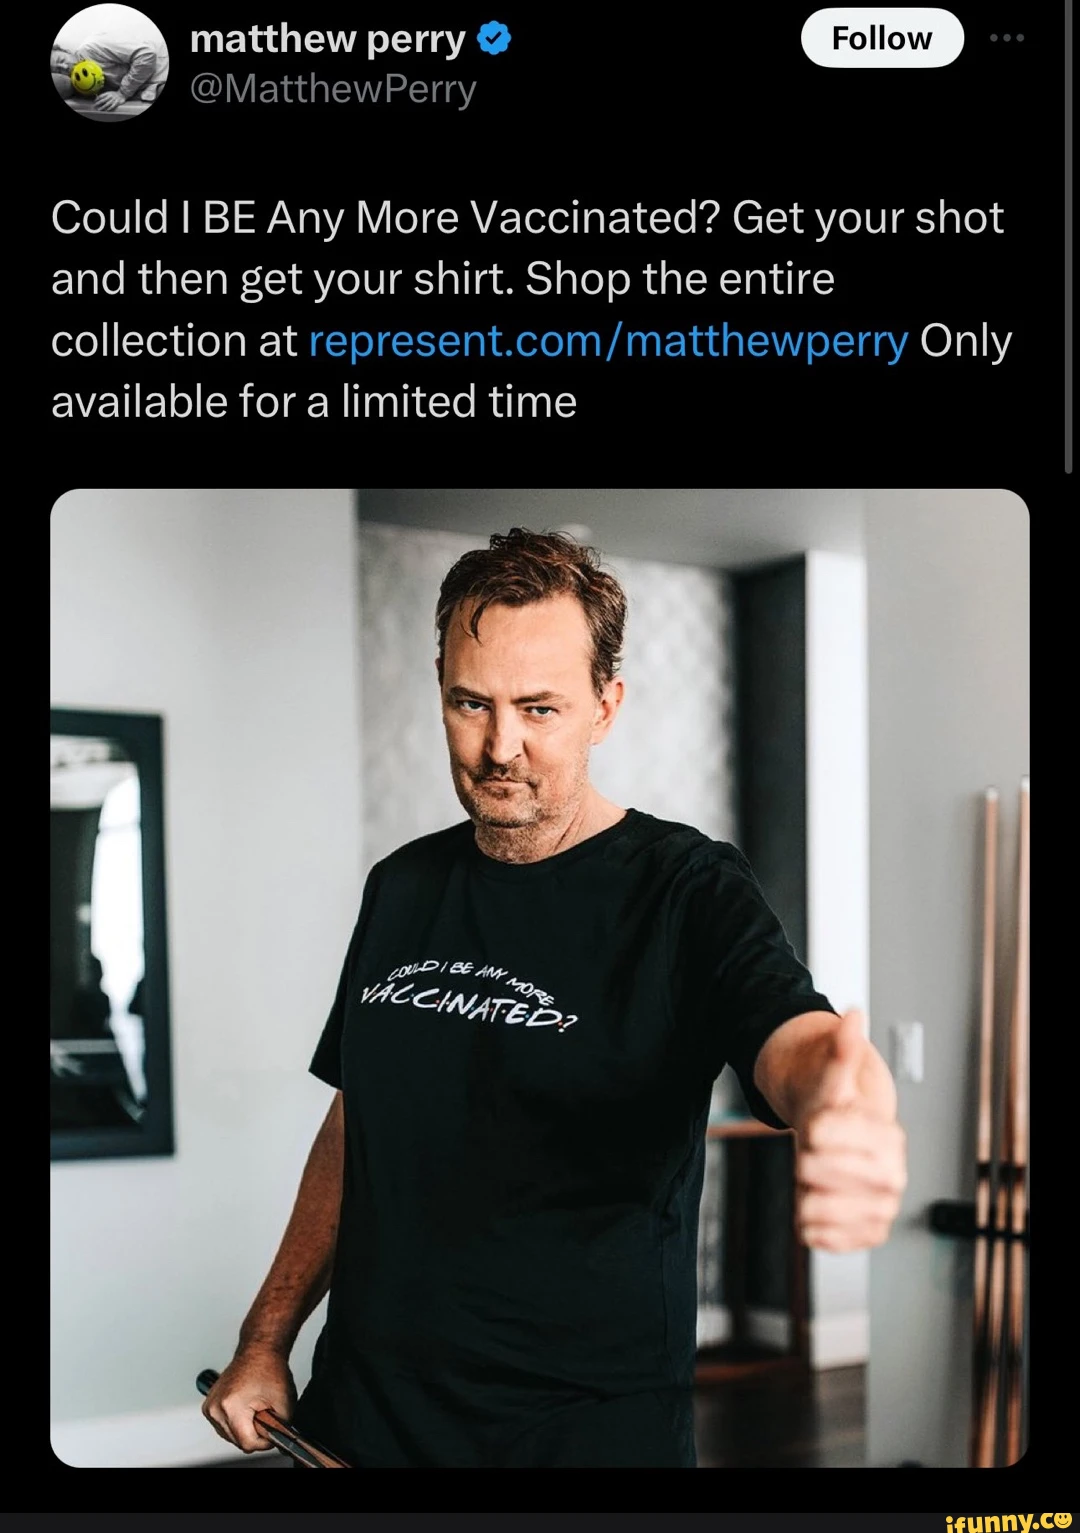 matthew perry @ Follow @MatthewPerry Could I BE Any More Vaccinated? Get your shot and then get your shirt. Shop the entire collection at Only available for a limited time